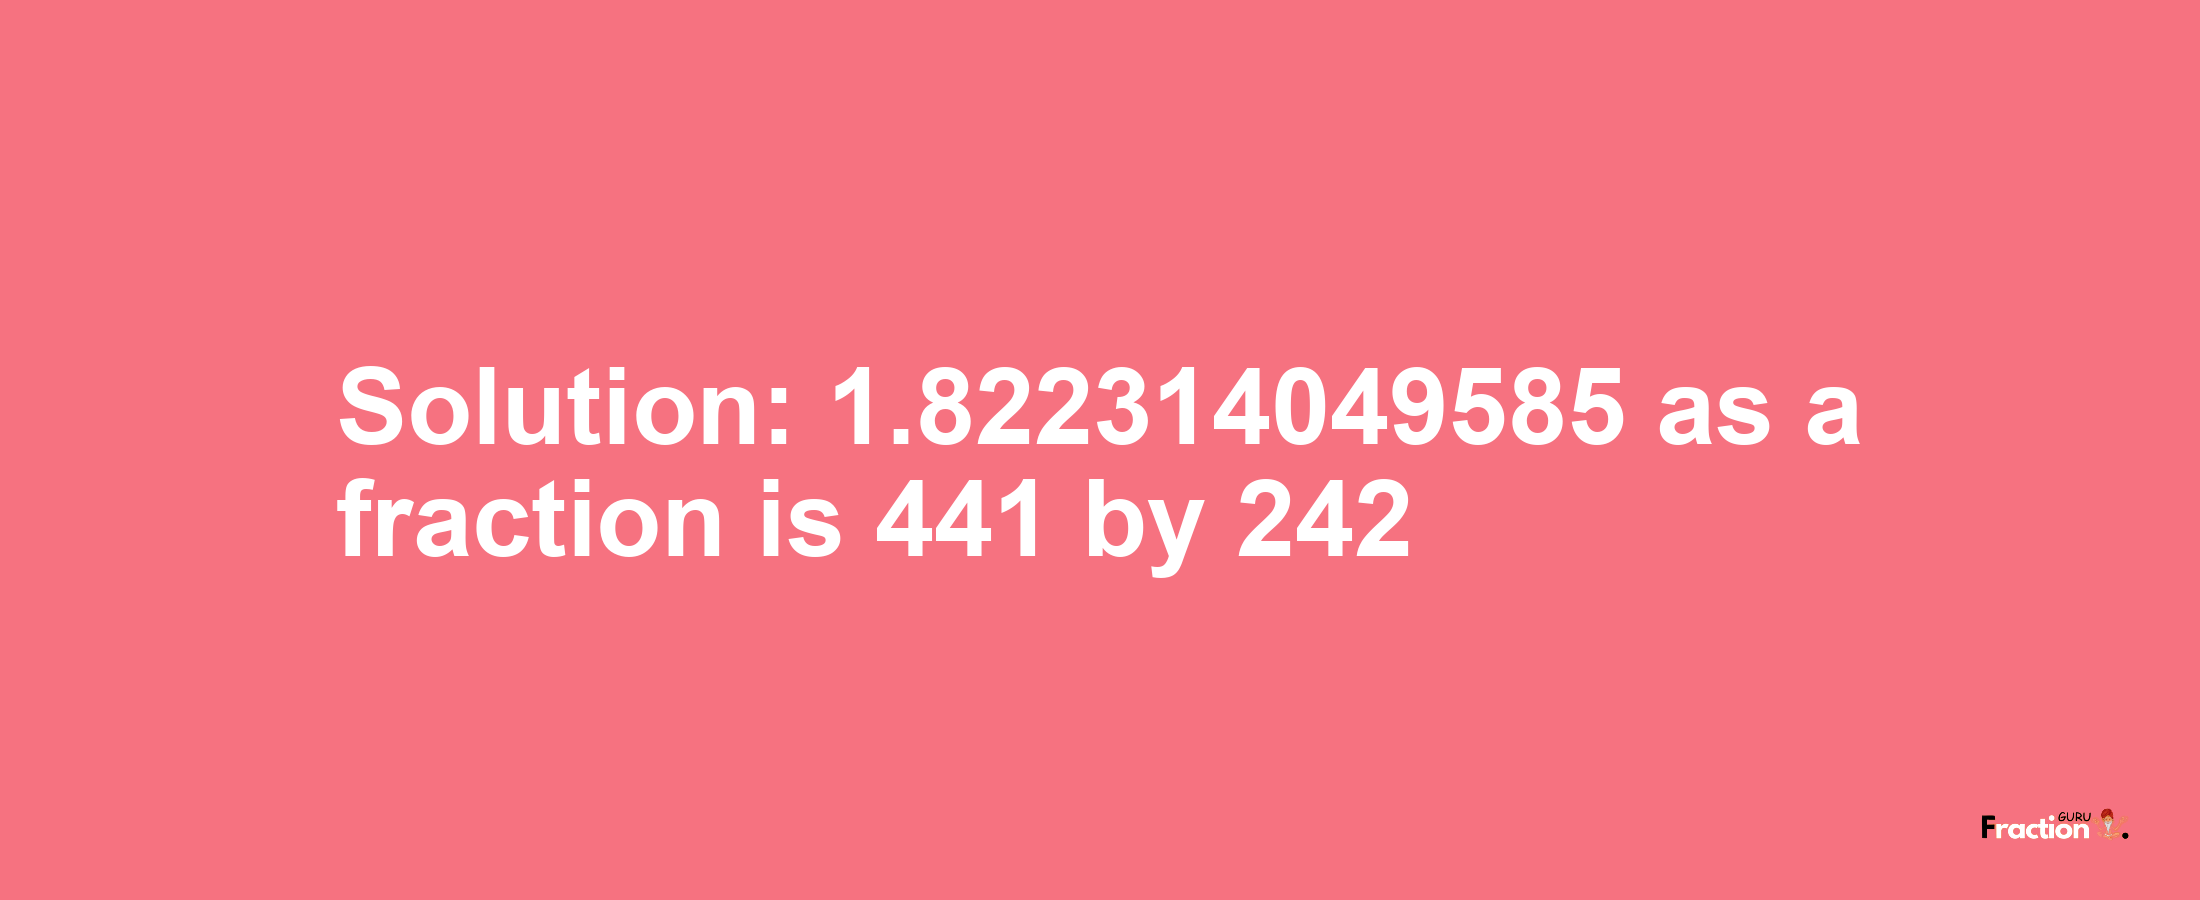 Solution:1.822314049585 as a fraction is 441/242